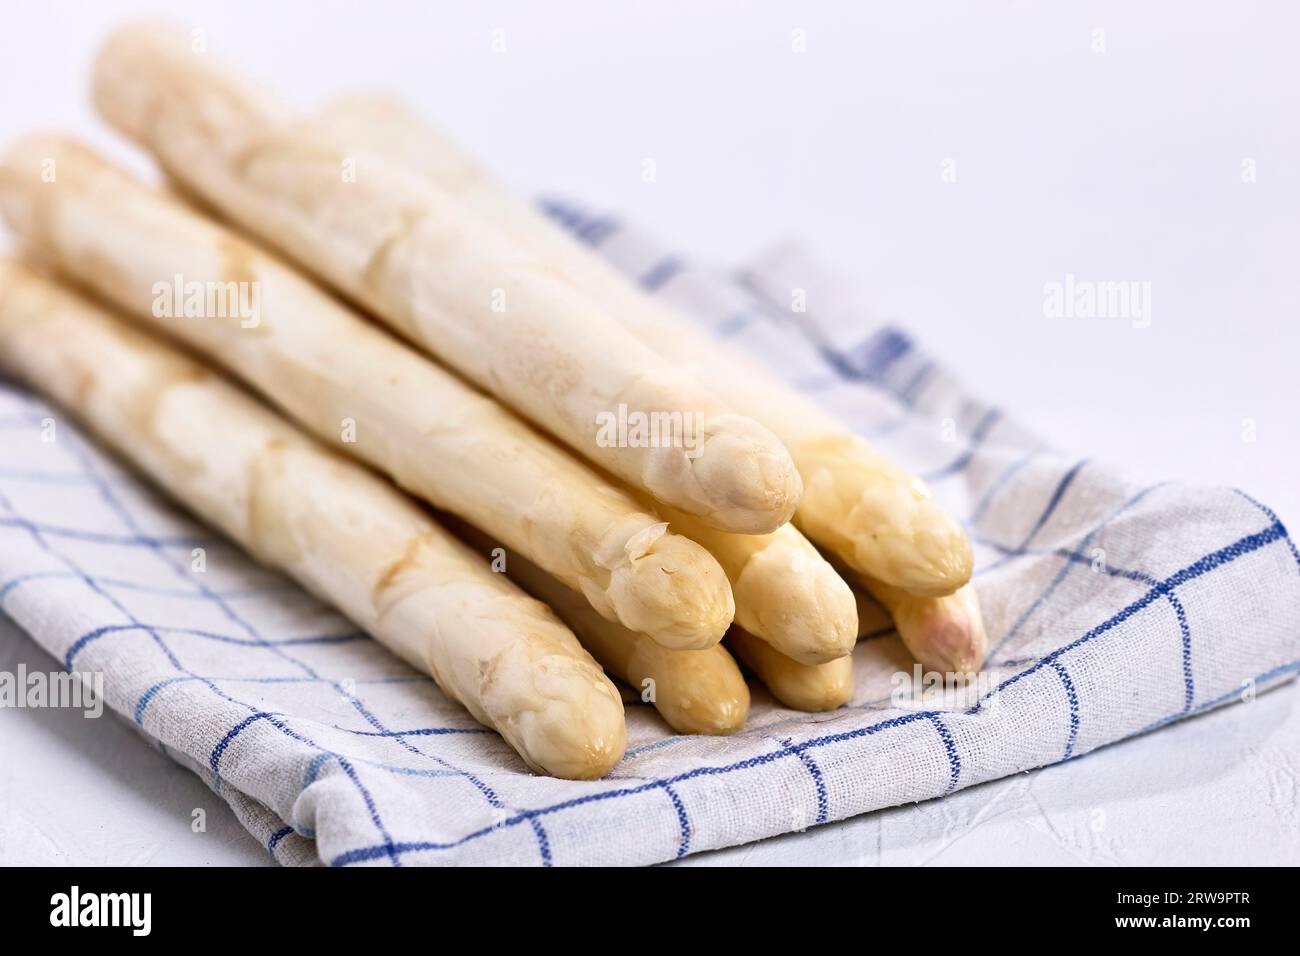 A bunch of white asparagus lies on a white-blue chequered kitchen towel against a white background Stock Photo